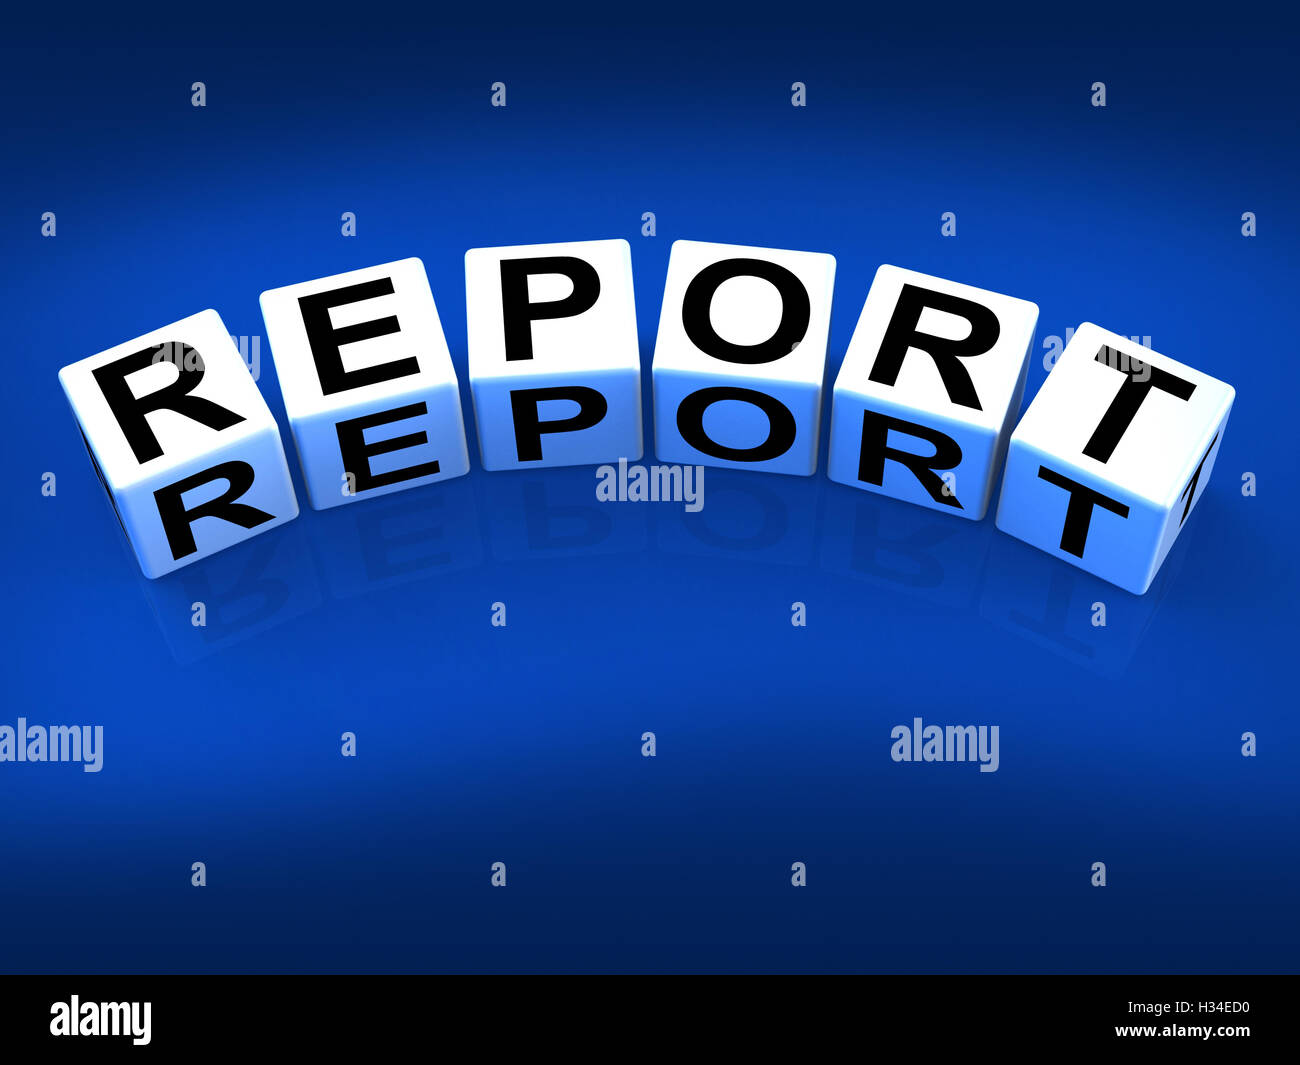 Report Blocks Represent Reported Information or Articles Stock Photo